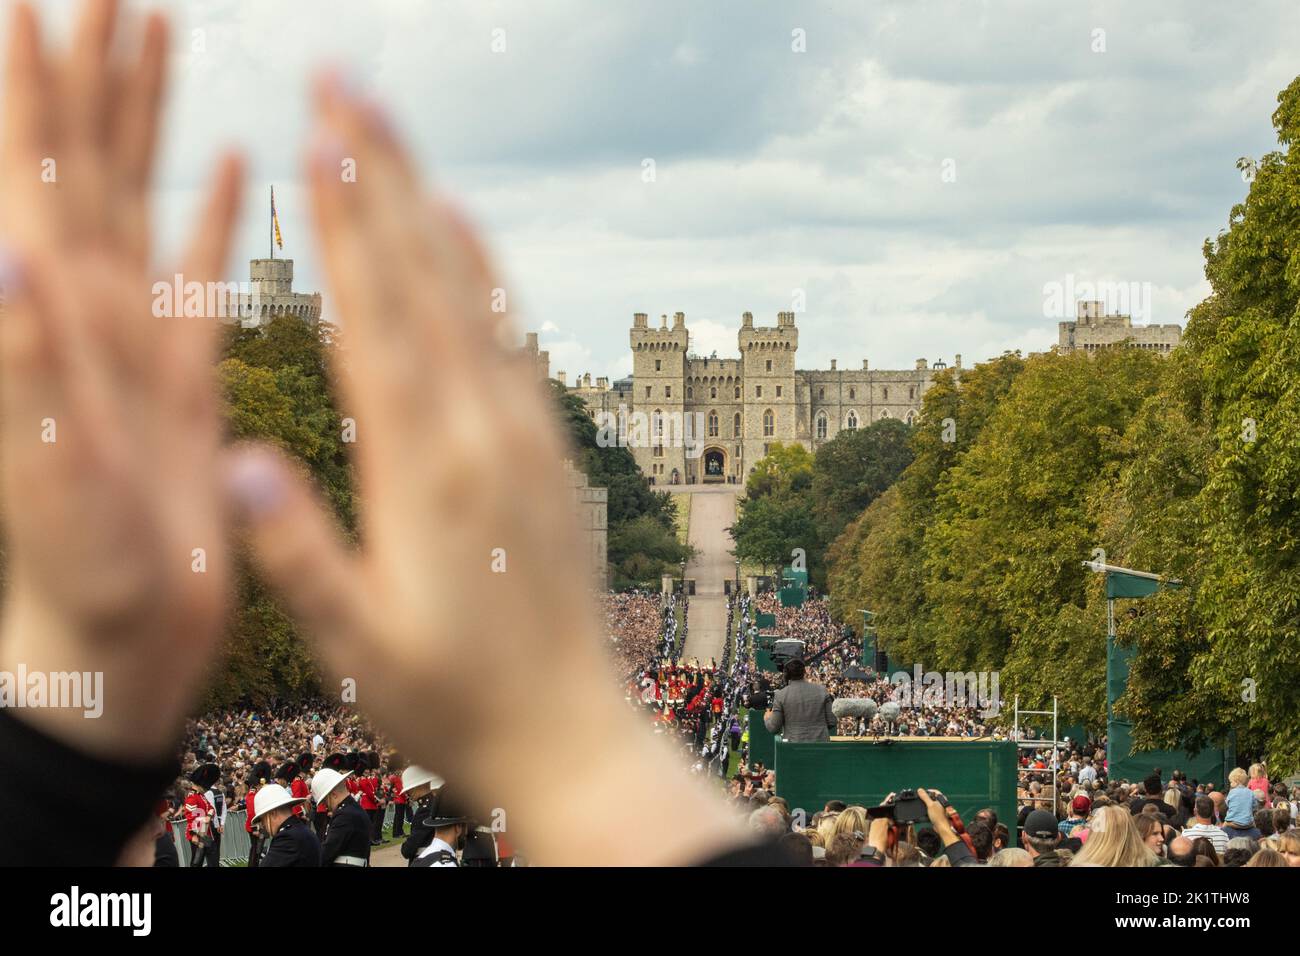 Windsor, UK. 19th September, 2022. A member of the public applauds during the procession of Queen Elizabeth II's coffin in the State Hearse along the Long Walk to St George’s Chapel for the Committal Service. Queen Elizabeth II, the UK's longest-serving monarch, died at Balmoral aged 96 on 8th September 2022 after a reign lasting 70 years. Credit: Mark Kerrison/Alamy Live News Stock Photo